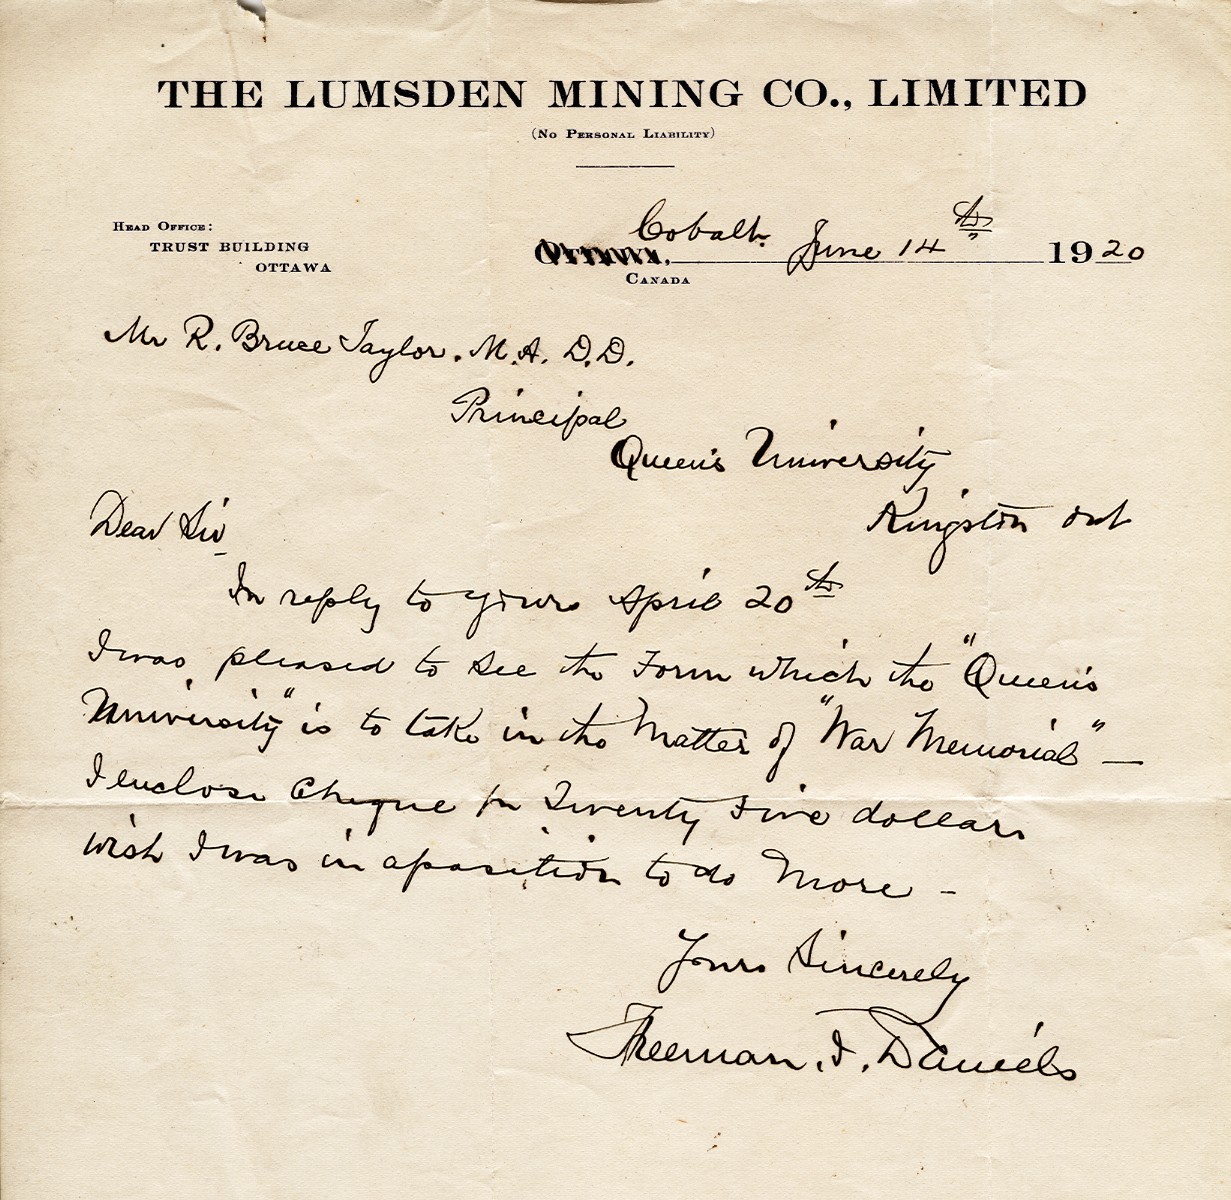 Letter from Freeman Daniels to Mr. R. Bruce Taylor, 14th June 1920